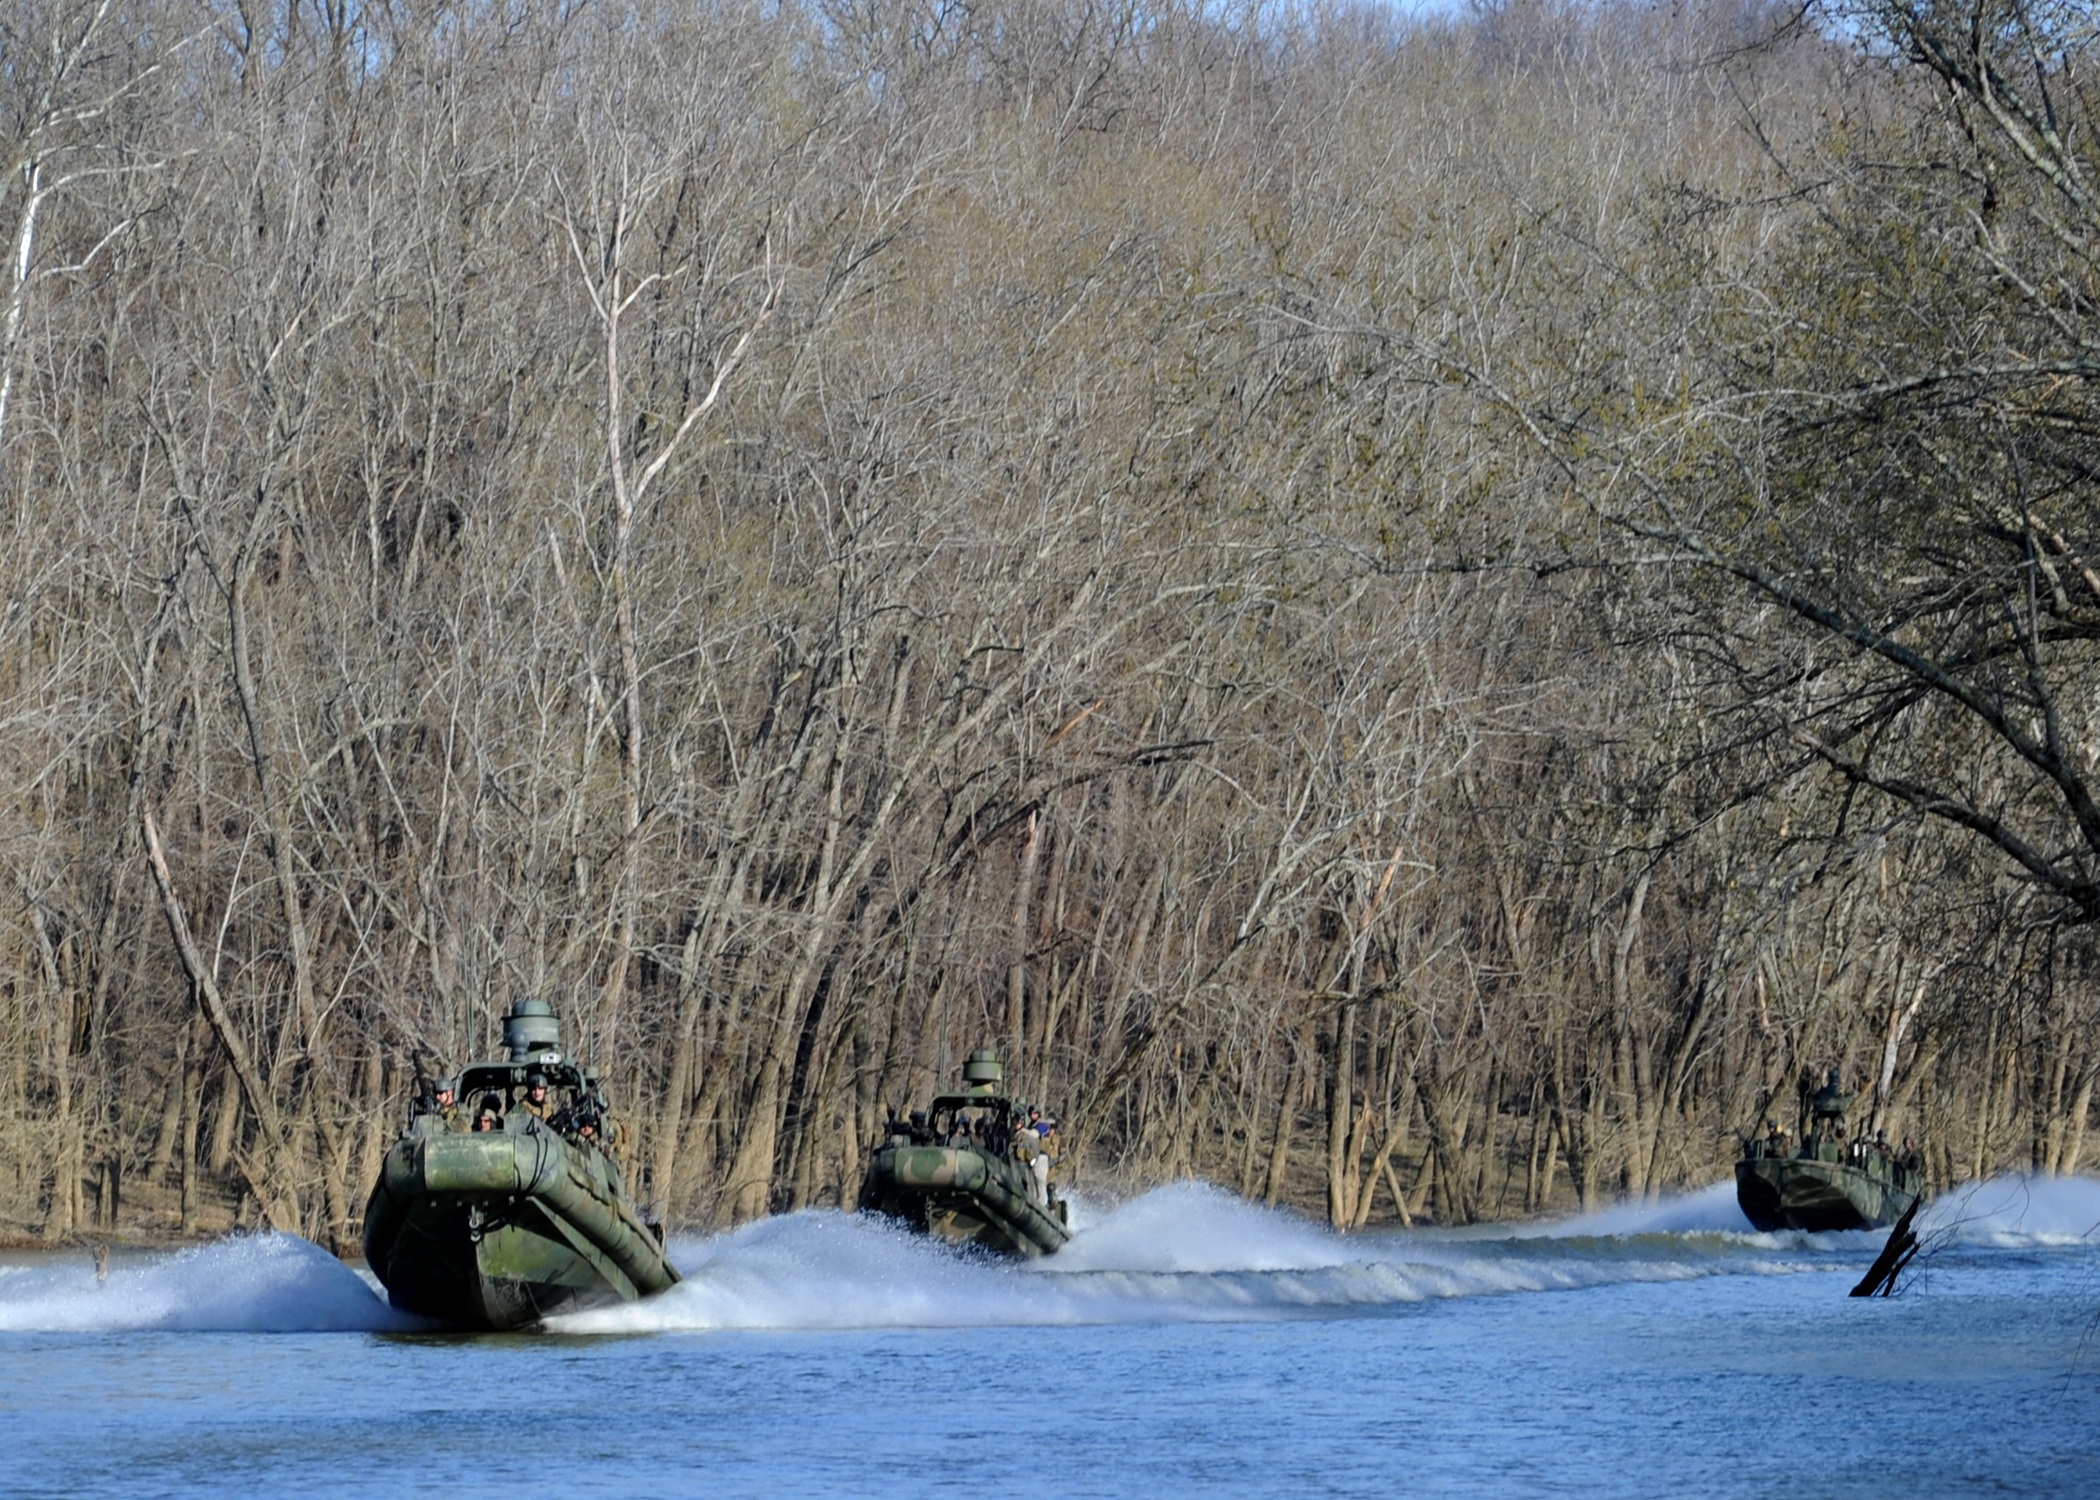 Military boats in the river photo